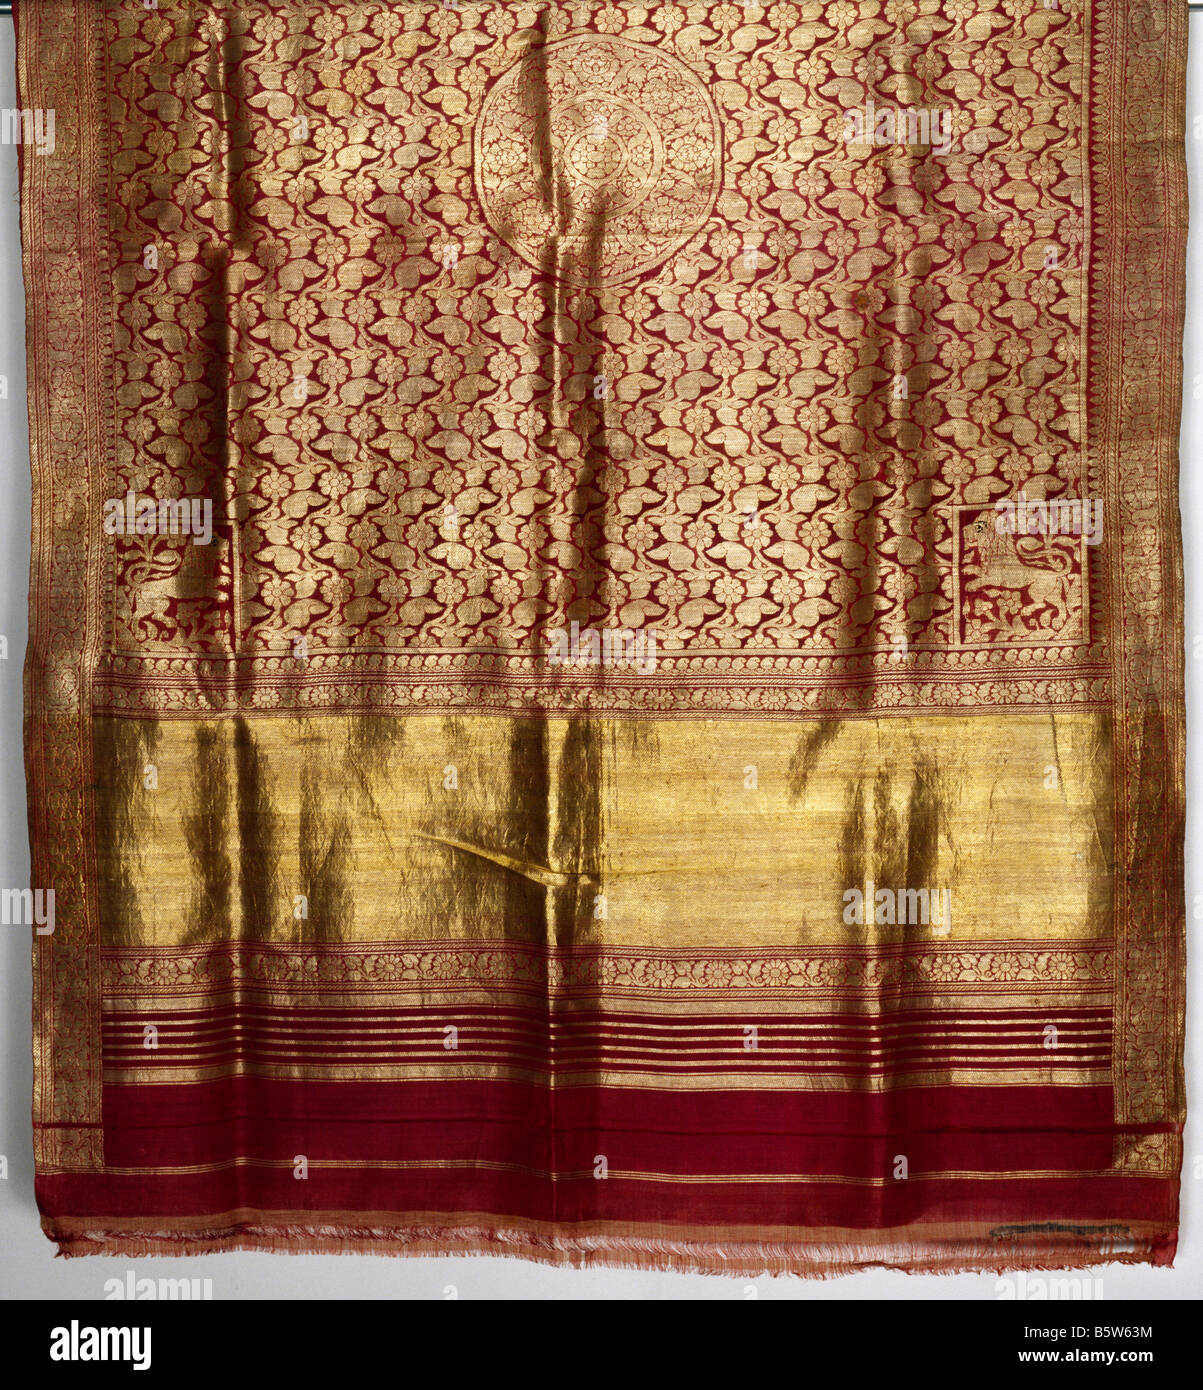 Brocade saree silk with gold weave. Surat. 19th c. National Museum of New Delhi India 56.41/5 314 x 132 cm Stock Photo